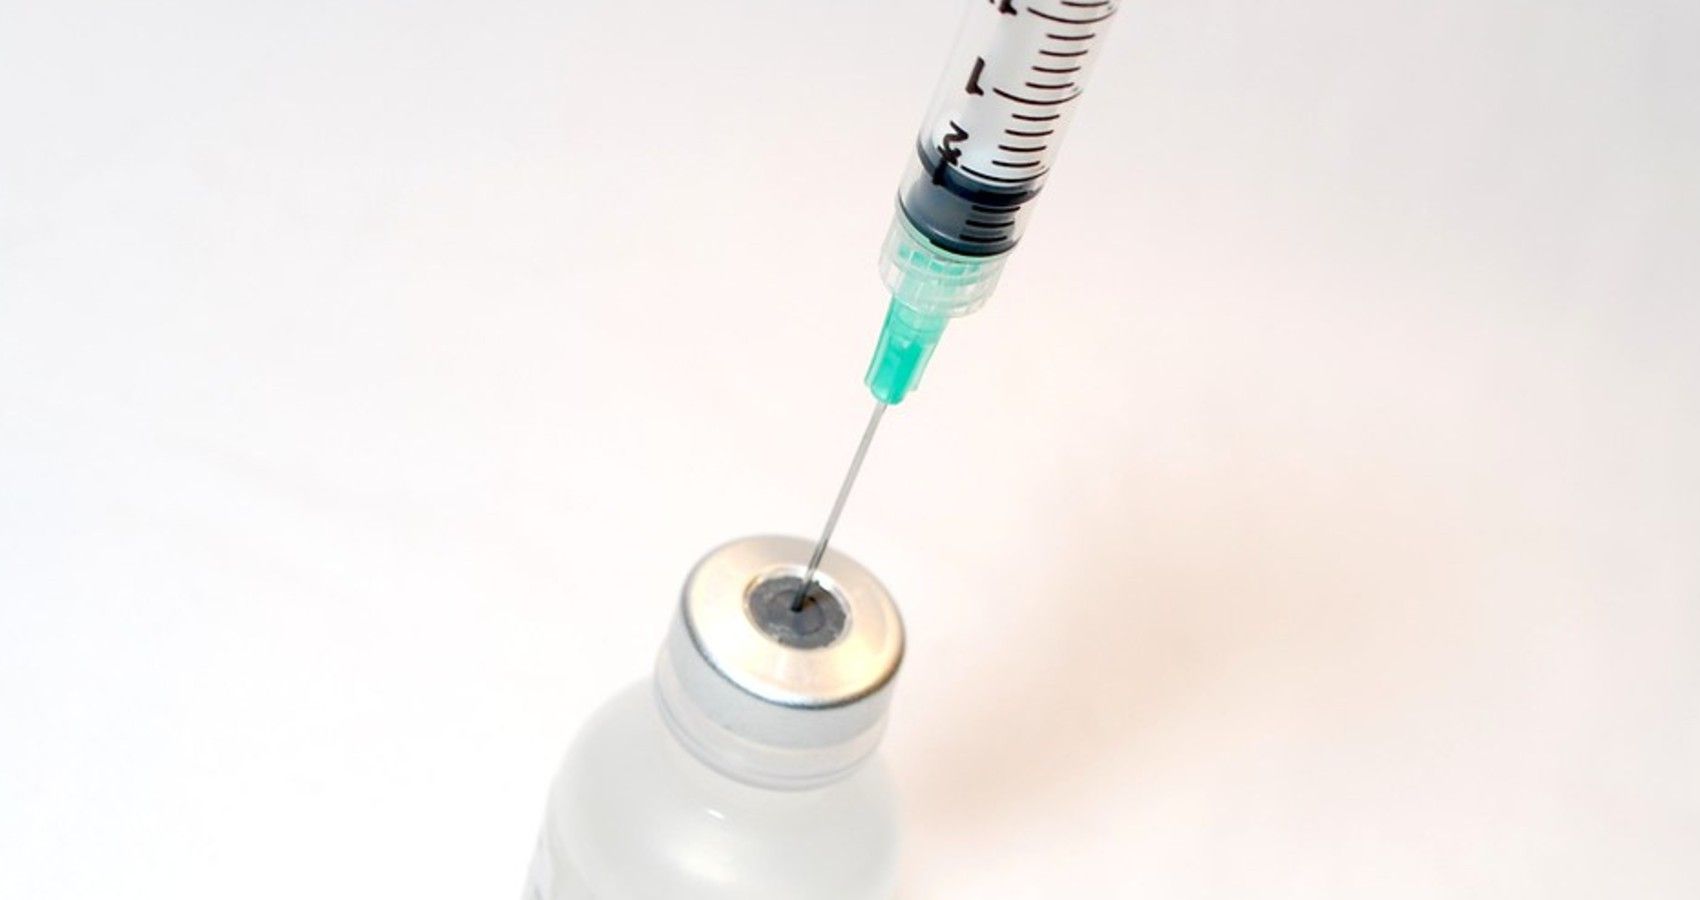 A syringe needle going into a vial